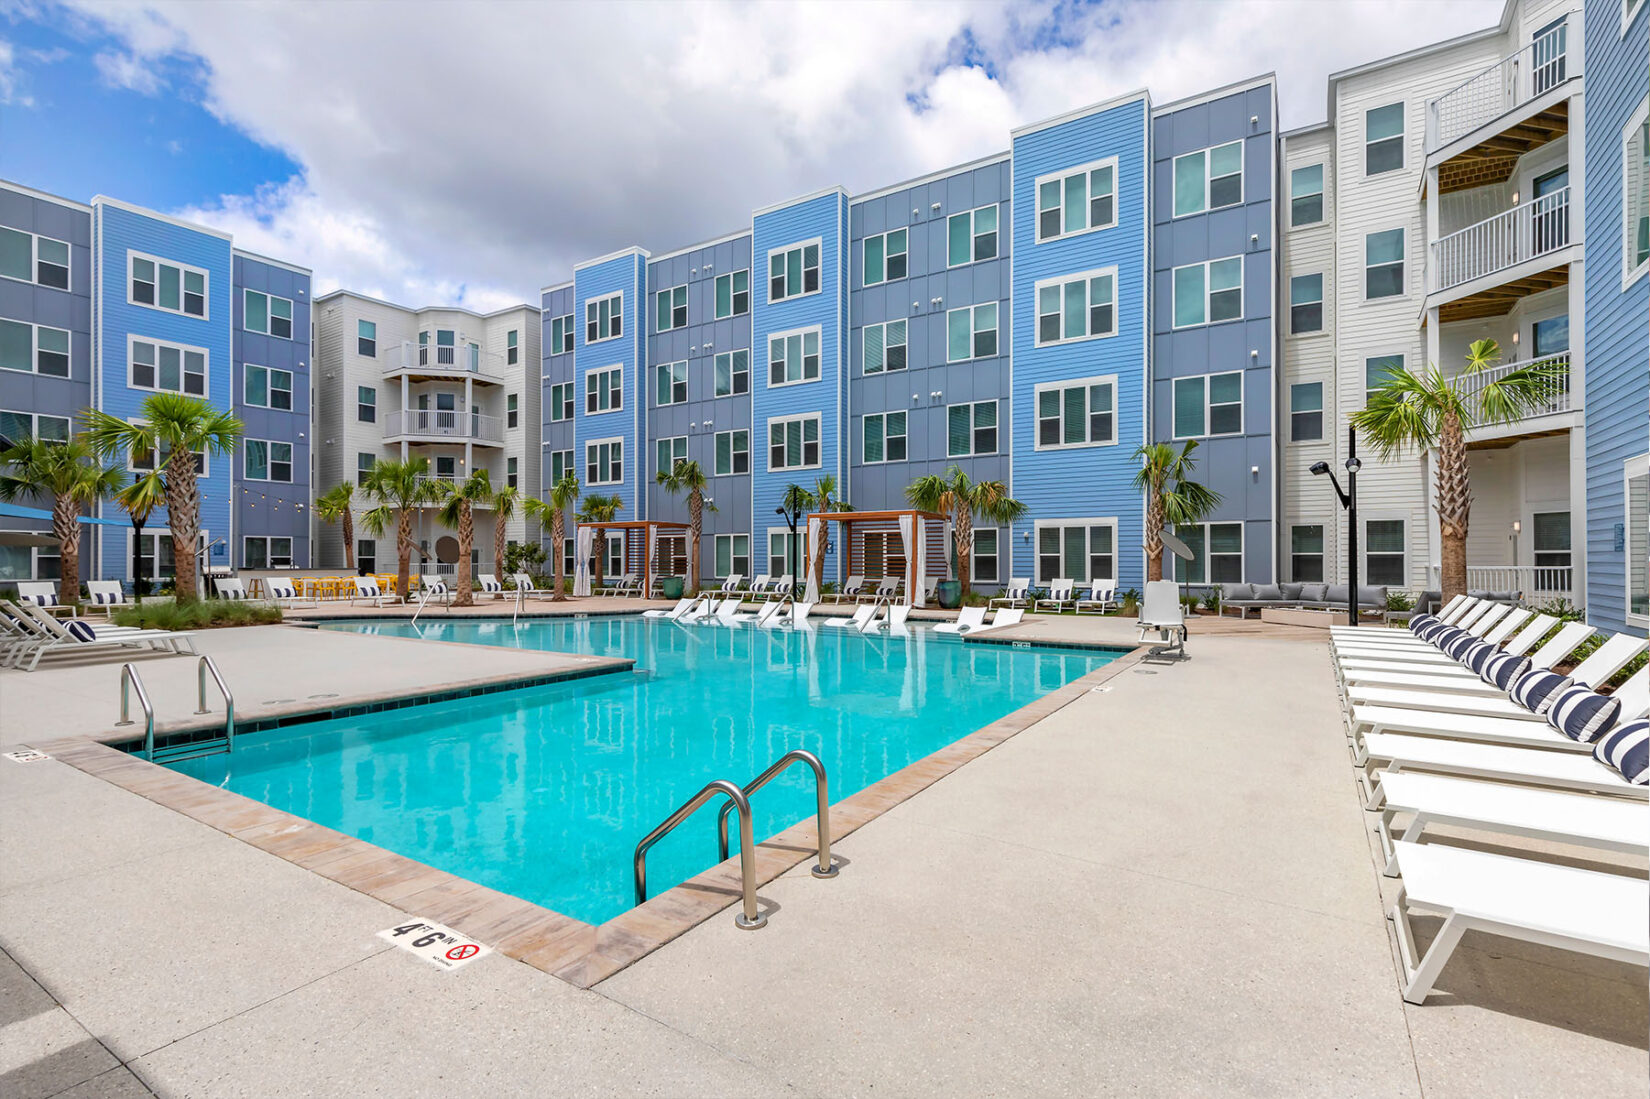 Apartment Community Pool with White Lounge Chairs